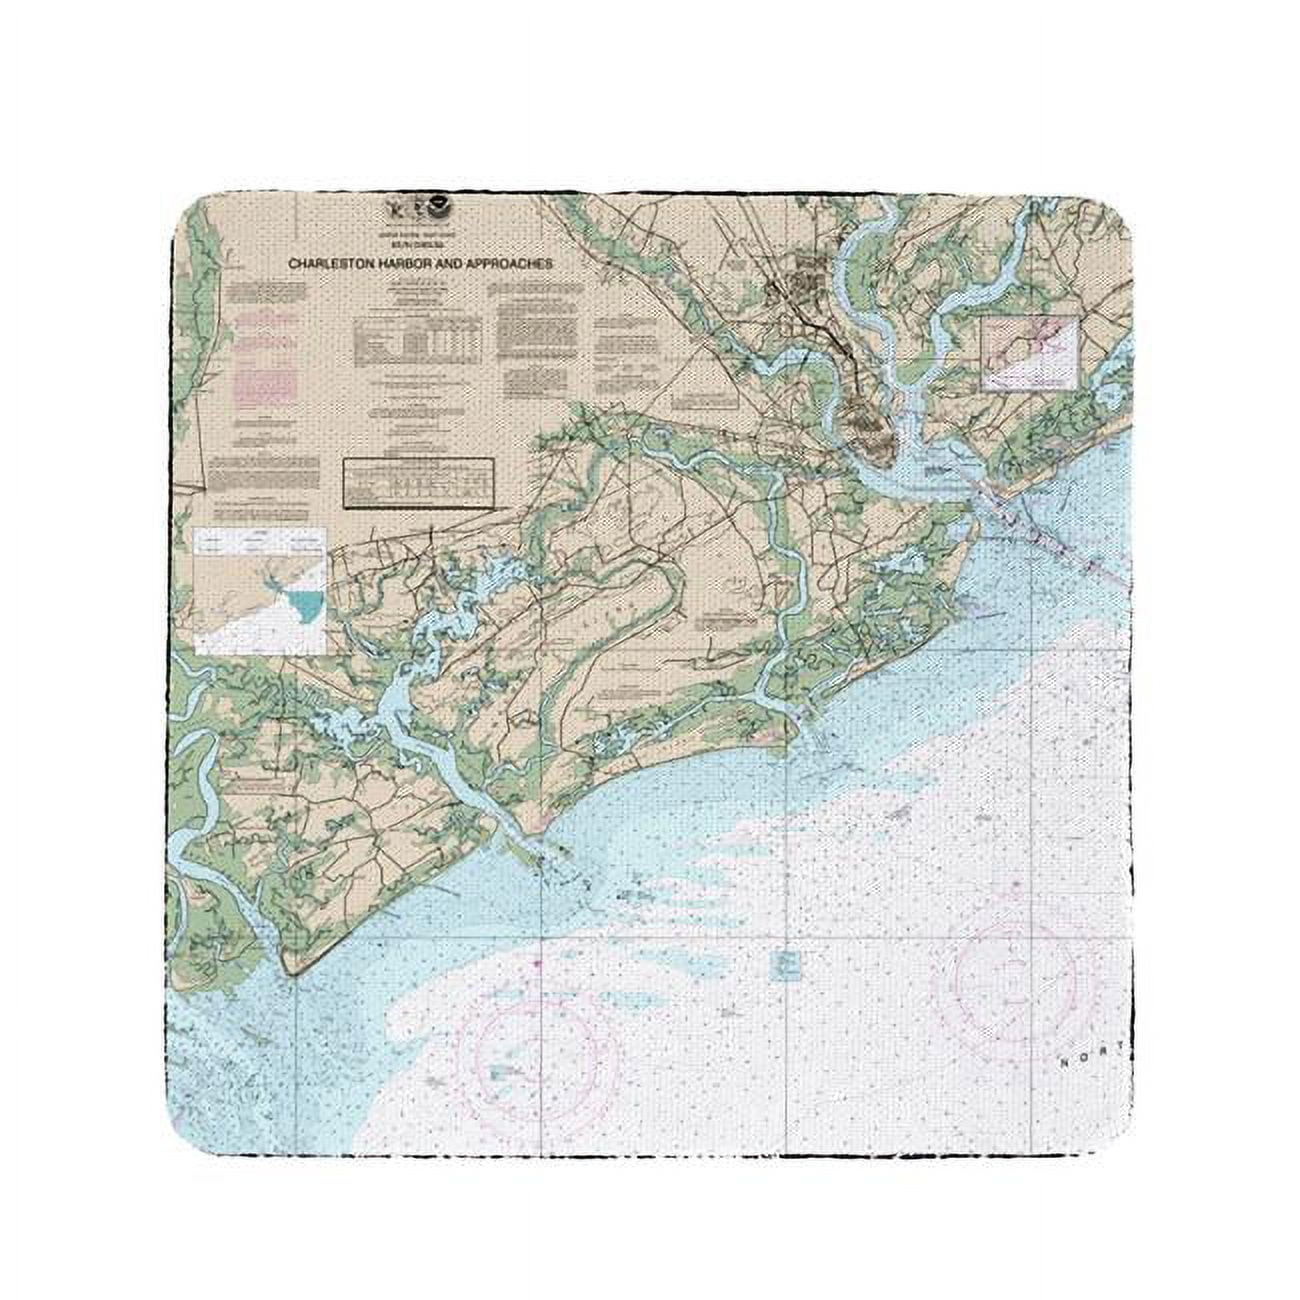 4 x 4 in. Charleston Harbor & Approaches, SC Nautical Map Coaster - Set of 4 -  Betsy Drake, BE45308